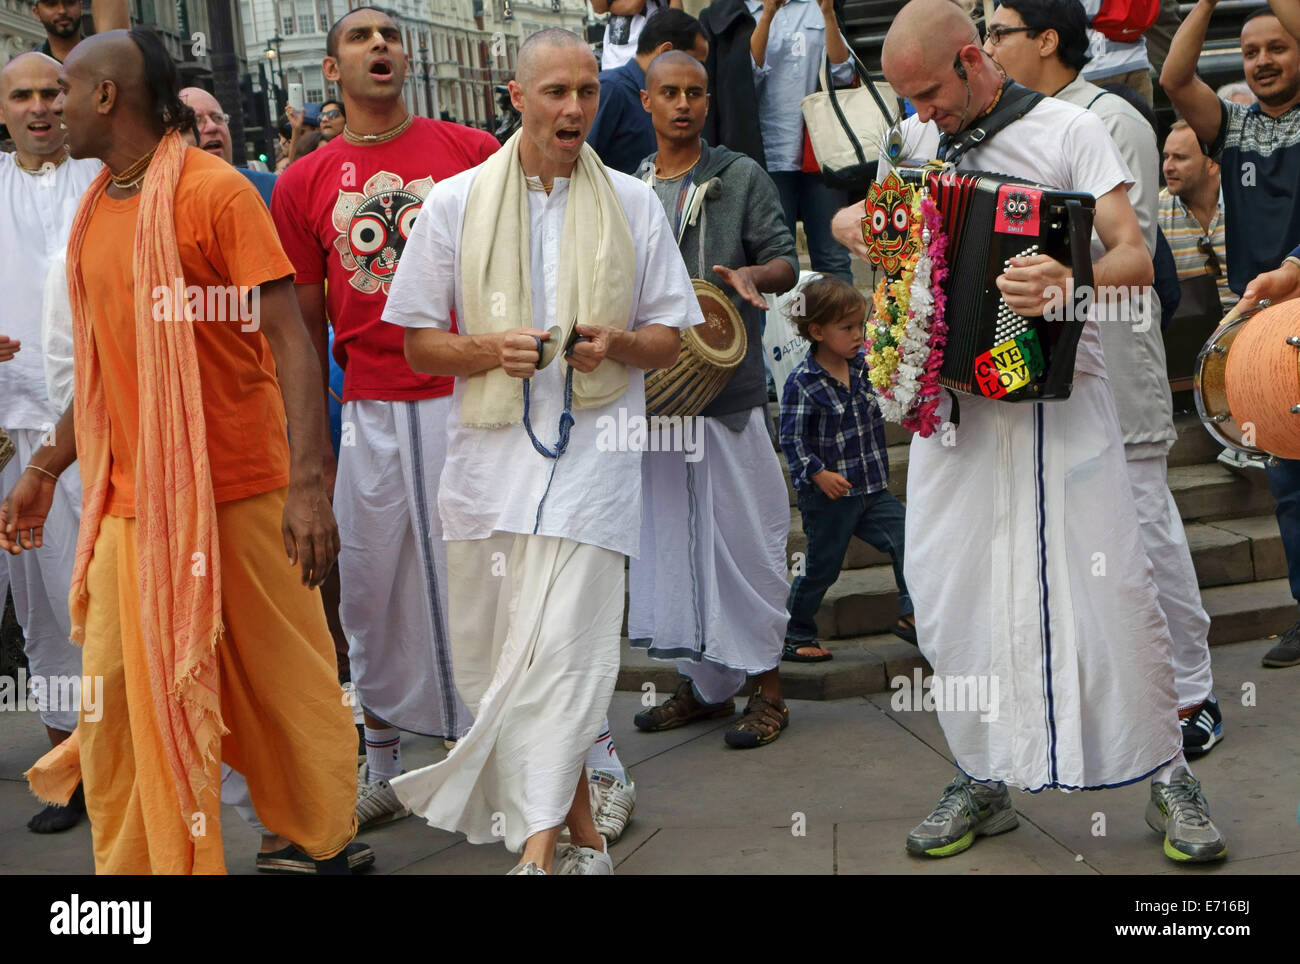 Hare Krishna followers performing in Piccadilly Circus, London Stock Photo